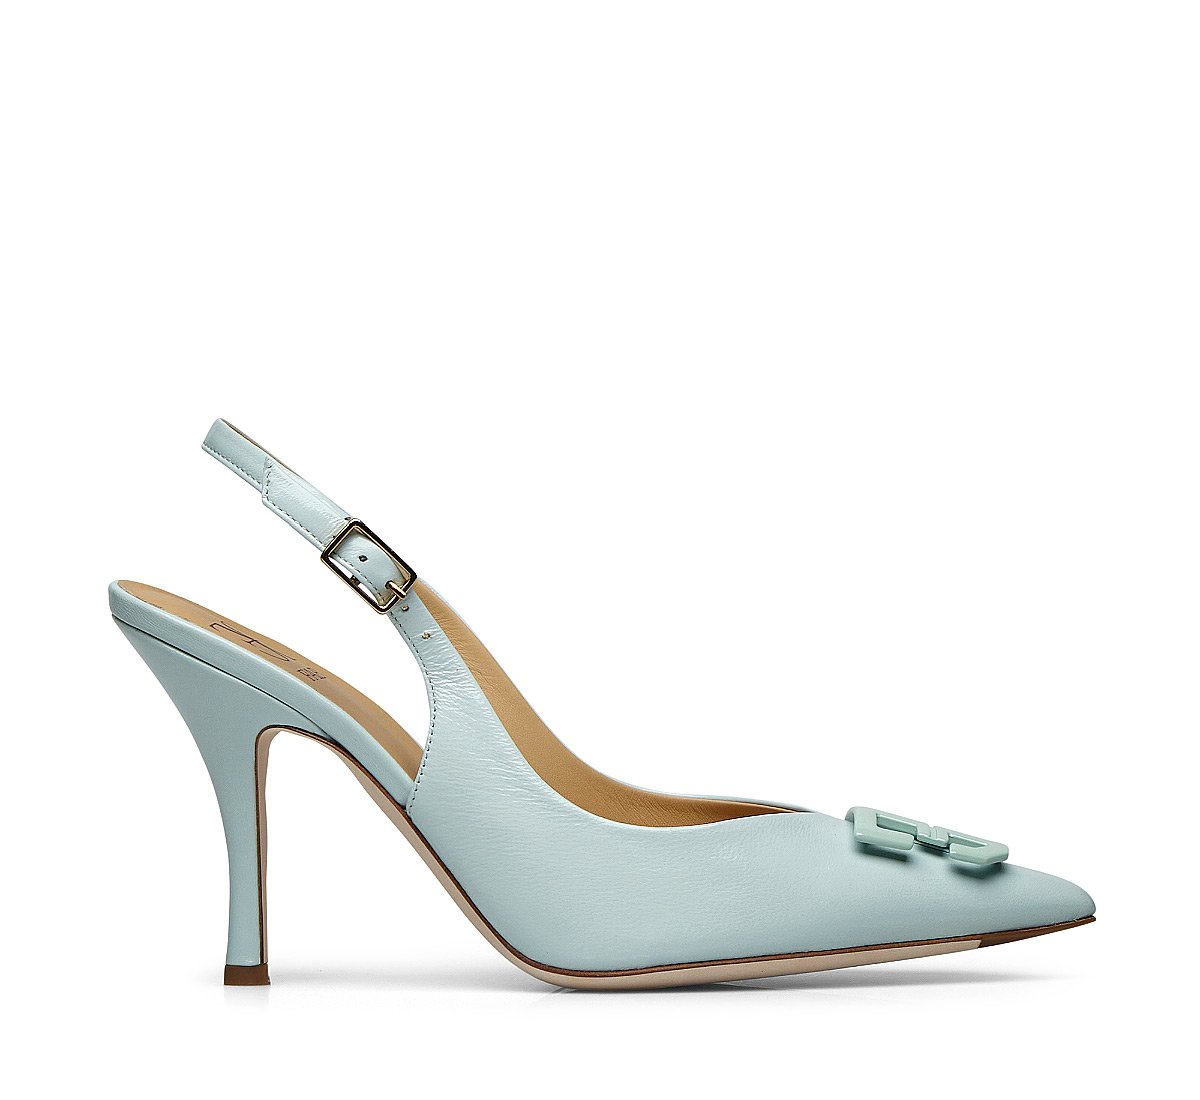 Iconic sling-back in soft nappa leather